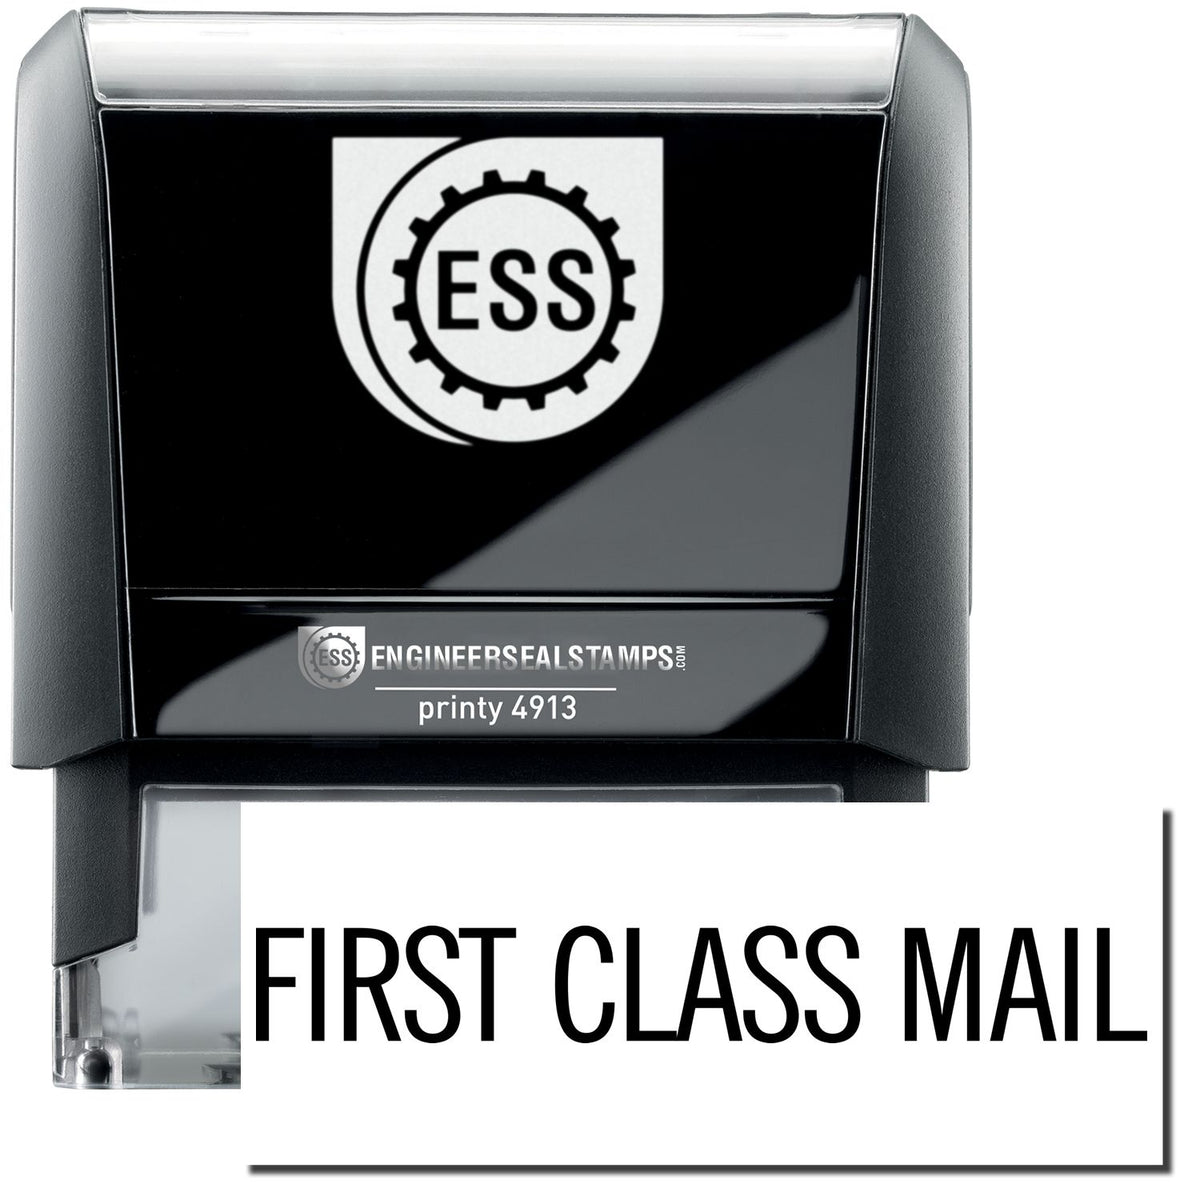 A self-inking stamp with a stamped image showing how the text &quot;FIRST CLASS MAIL&quot; in a large Narrow font is displayed by it after stamping.